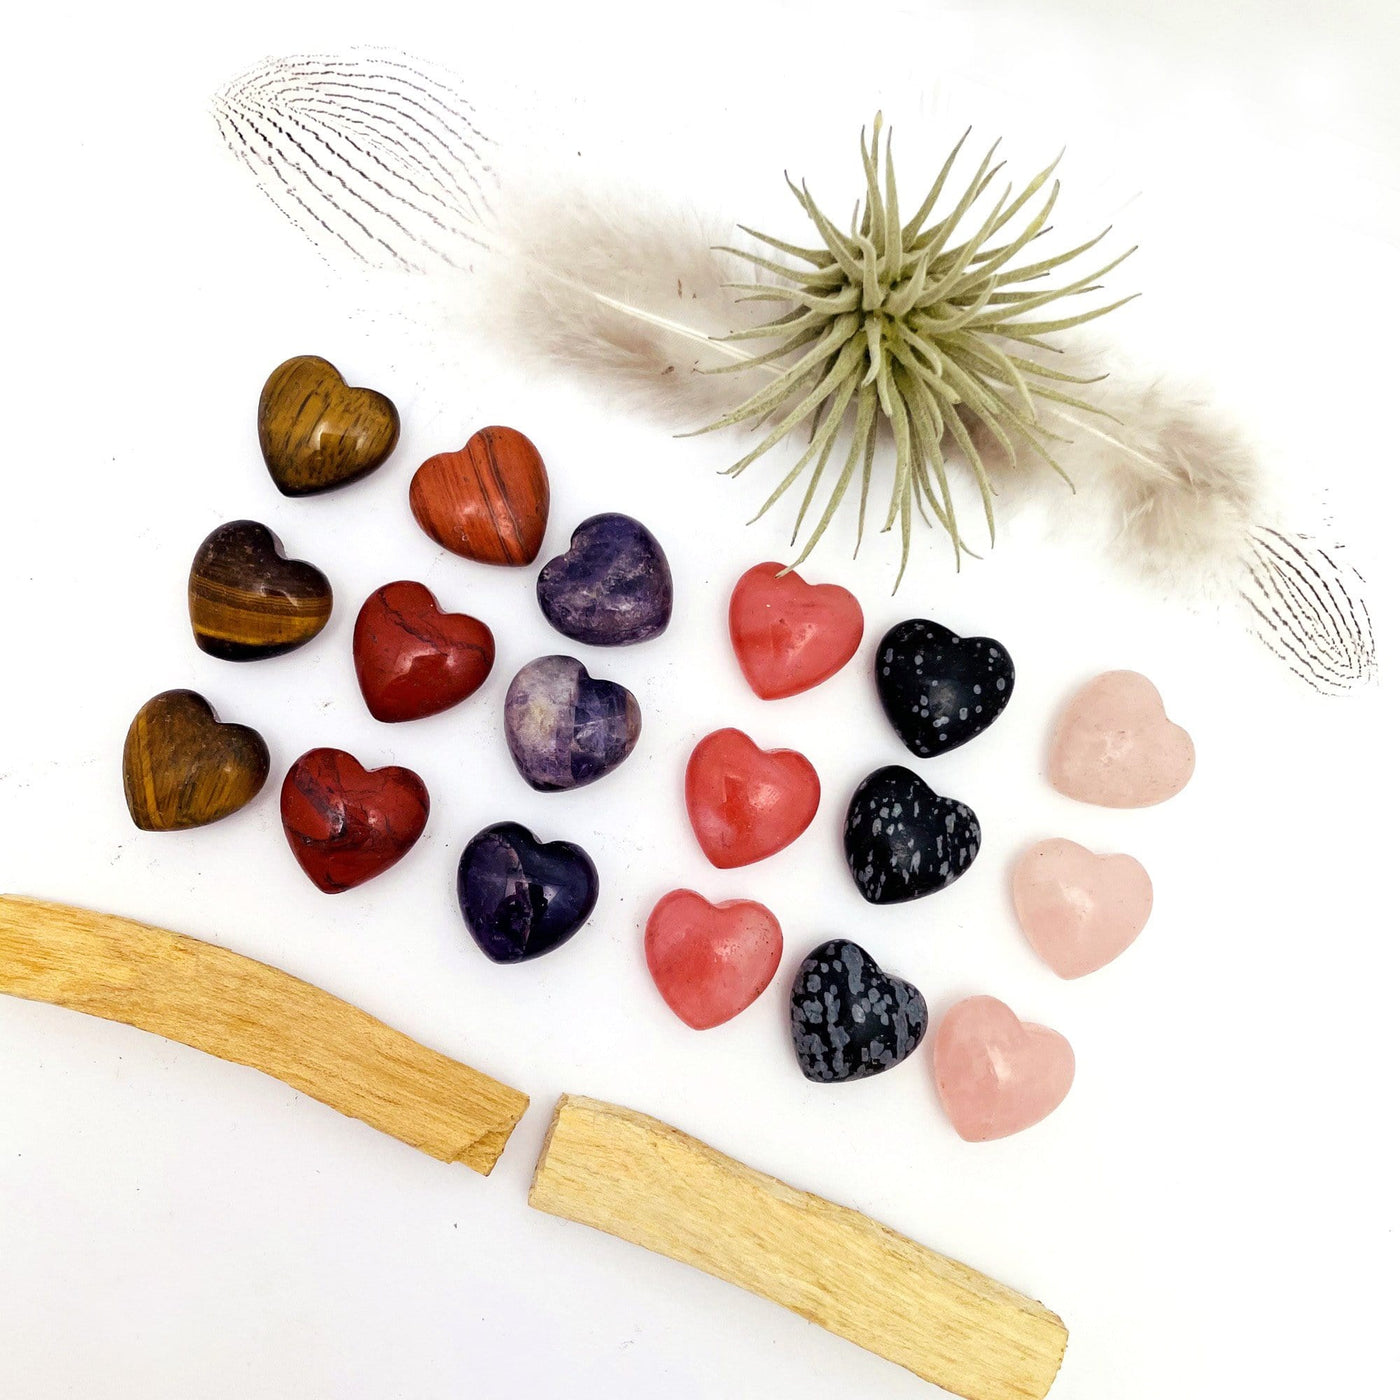 3 samples of each stone of these Stone hearts in all the available sgtones, tigers eye, red jasper, amethyst, strawberry quartz, rose quartz, snowflake obsidian